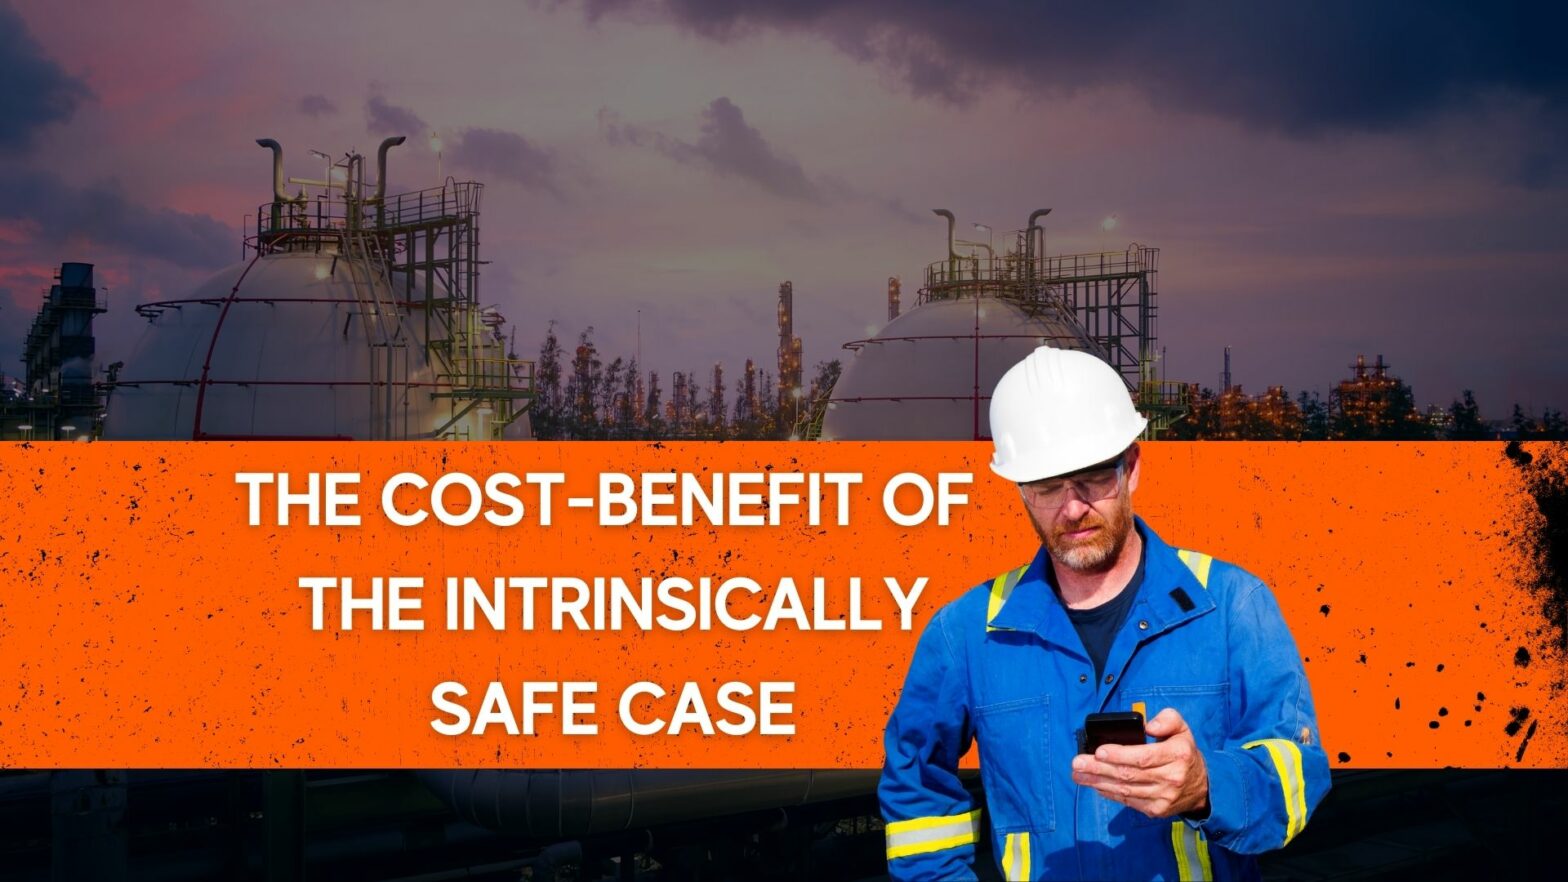 The cost-benefit of the Intrinsically safe Case